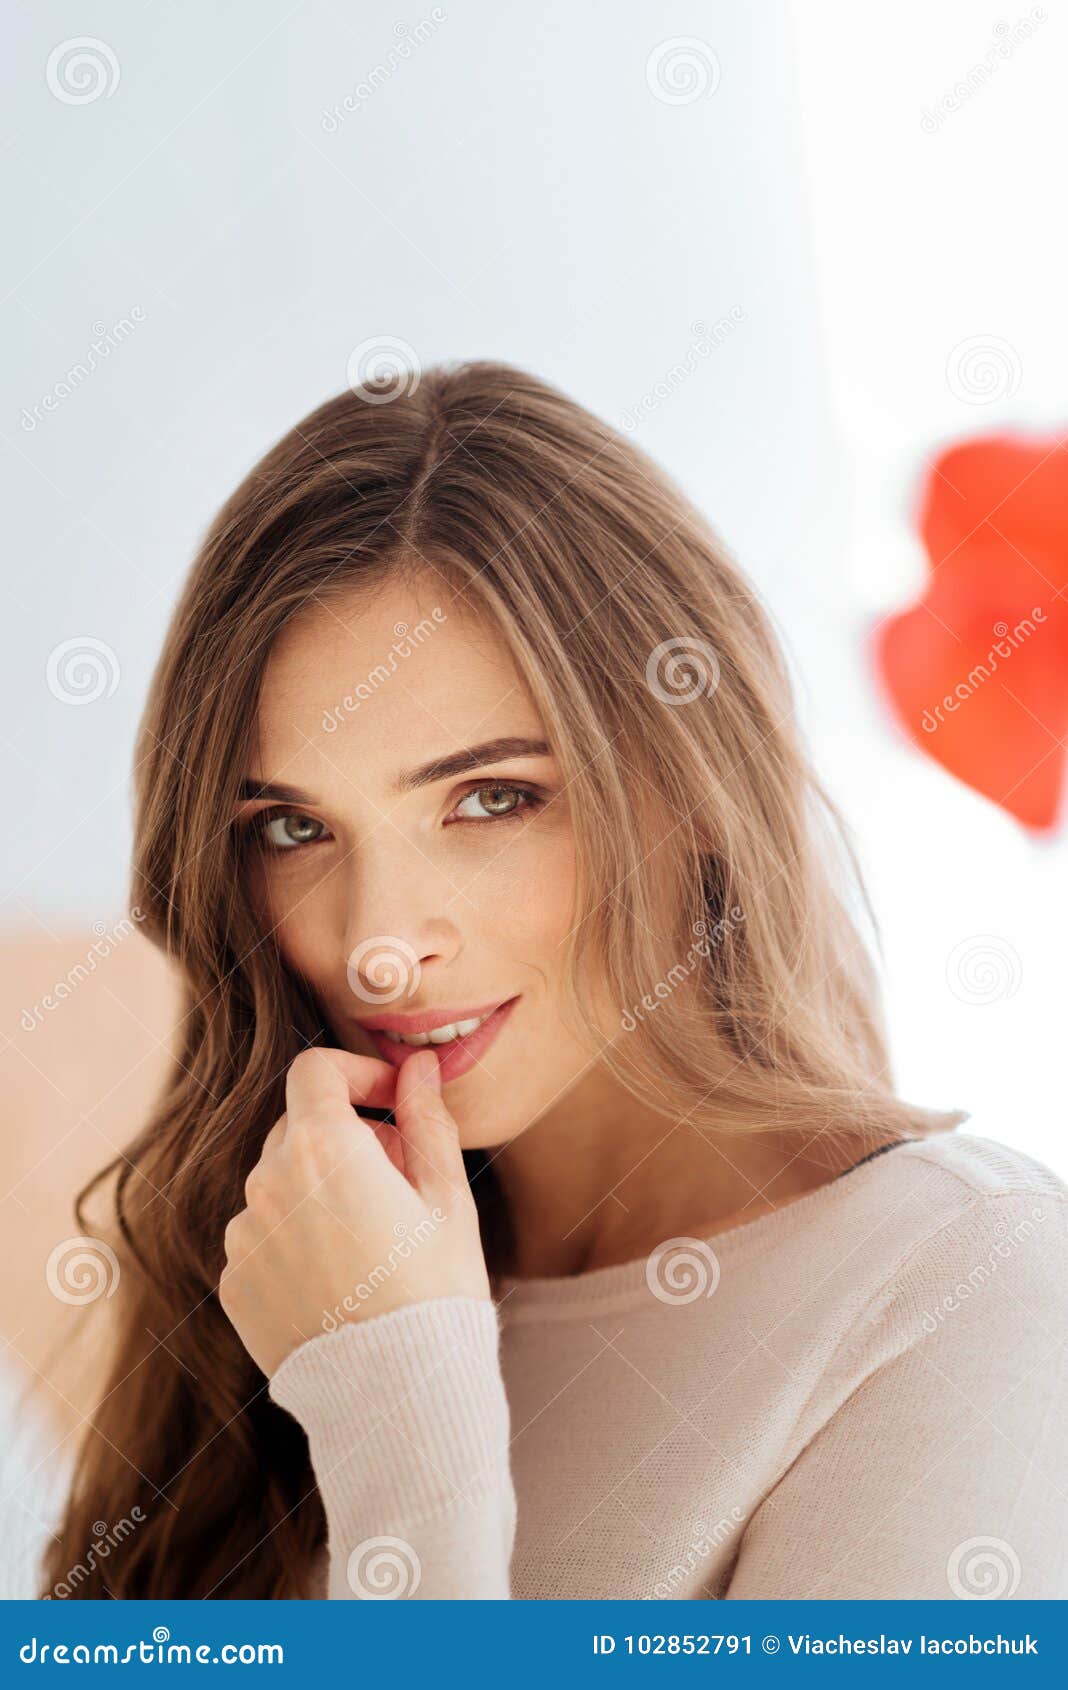 Beautiful Young Lady Tempting While Looking Into Camera Stock Image